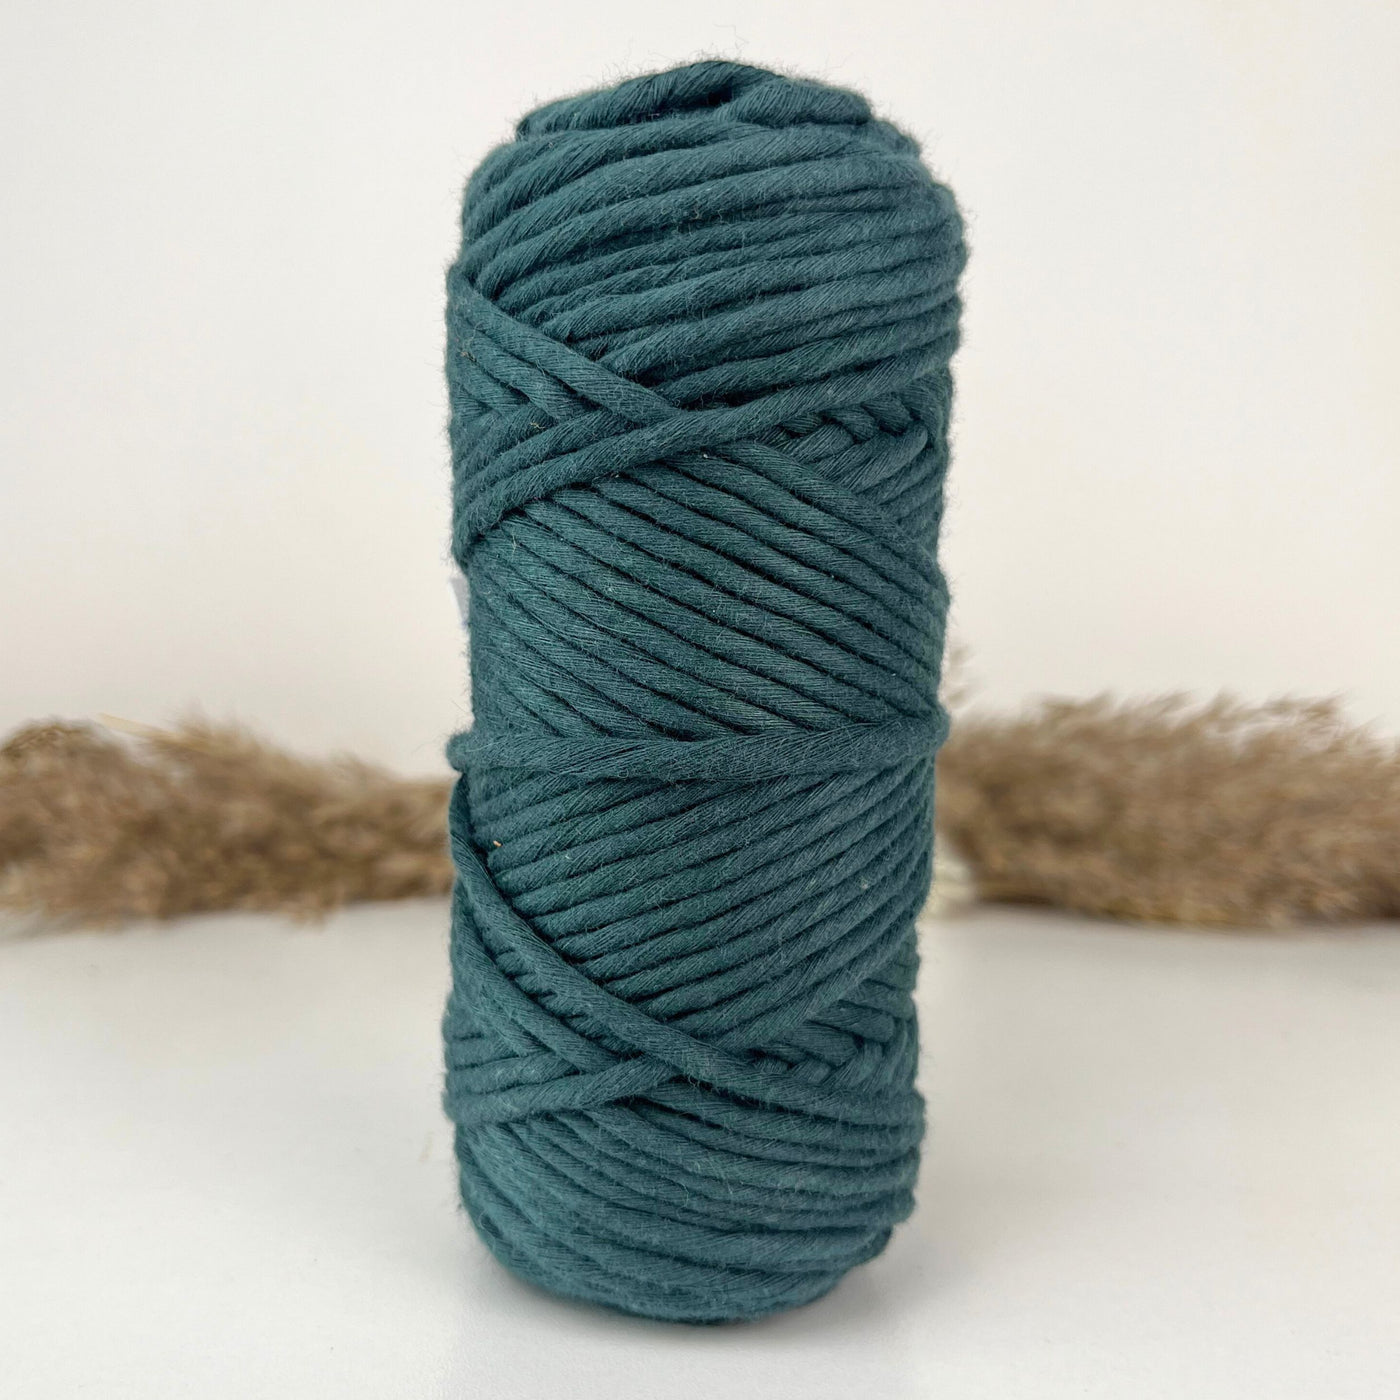 Sample Sale 3mm Single Strand Recycled Cotton Cords (7 Roll Bundle)